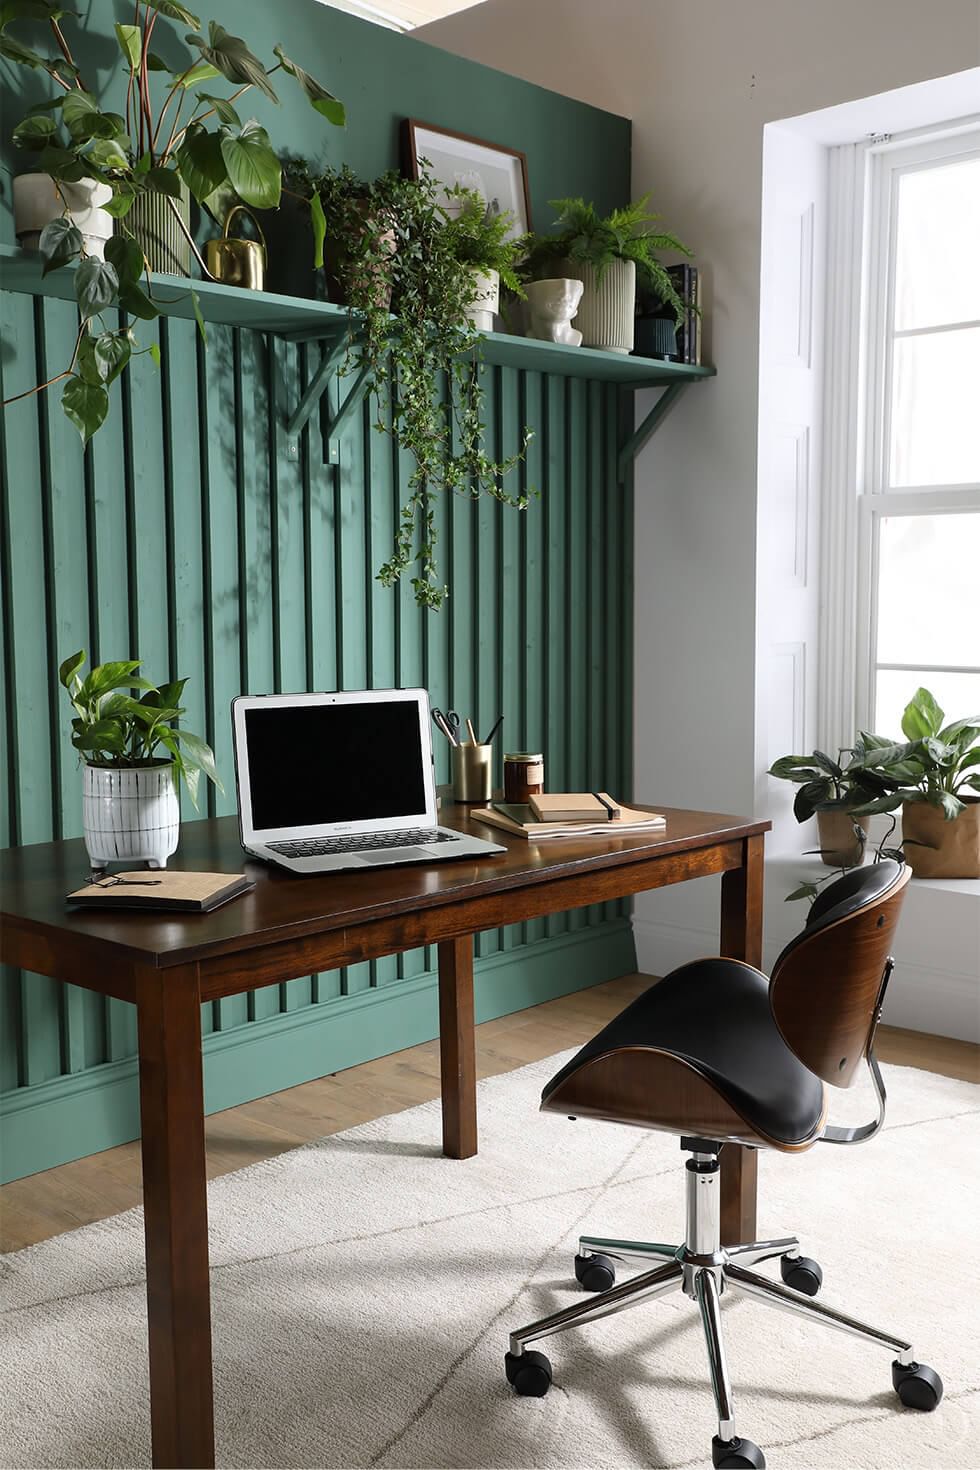 Home office with green walls and wooden desk